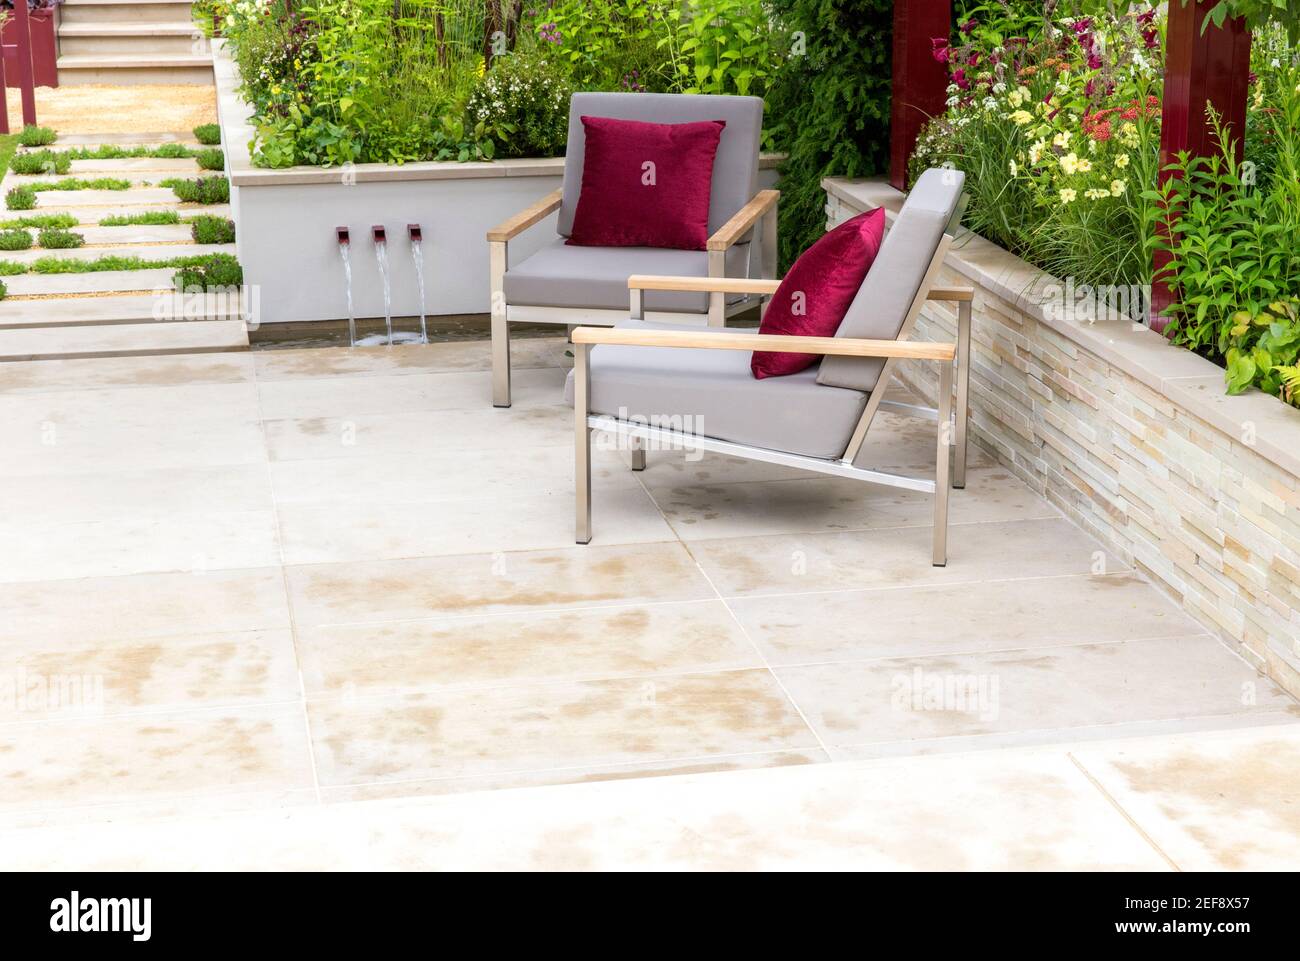 Modern urban stone garden patio with garden furniture chairs with red cushions - raised bed garden borders - Summer - London UK England Stock Photo